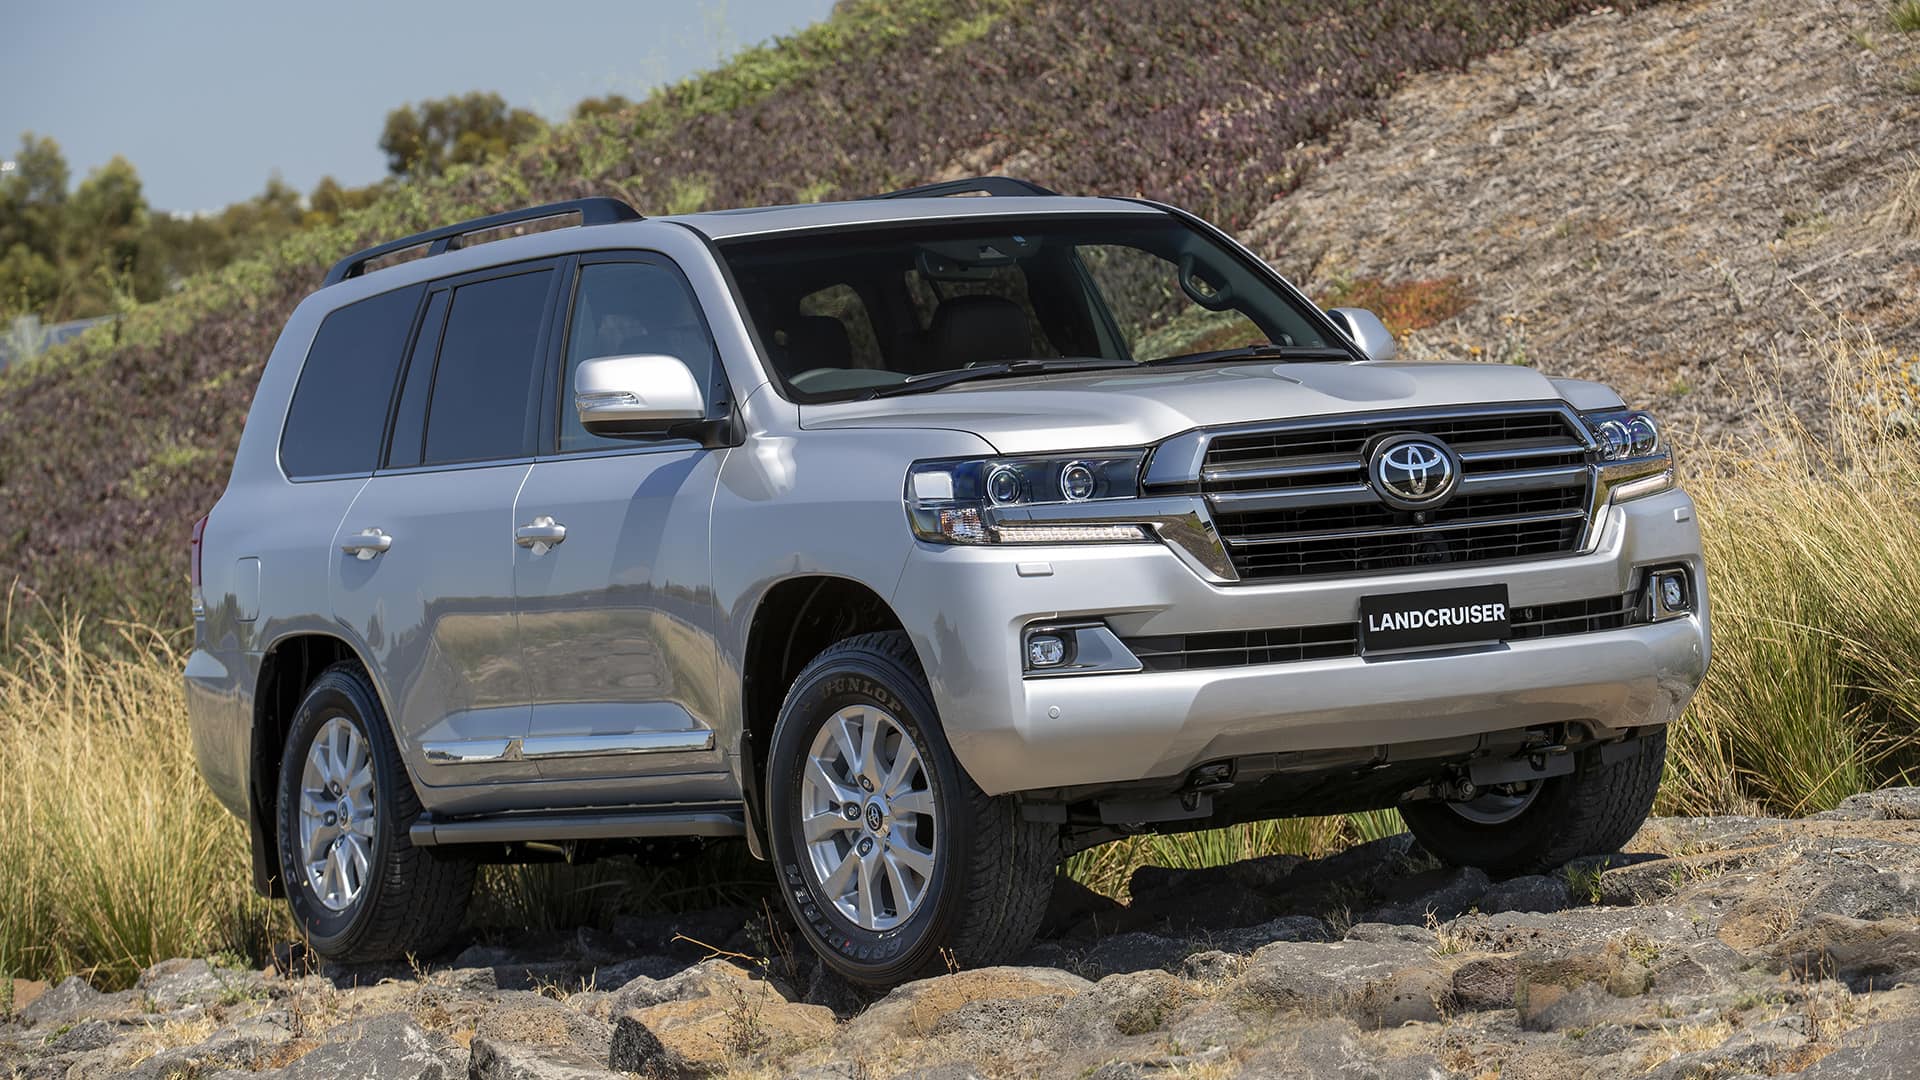 Toyota Launches Special Edition LandCruiser Horizon | Latest News